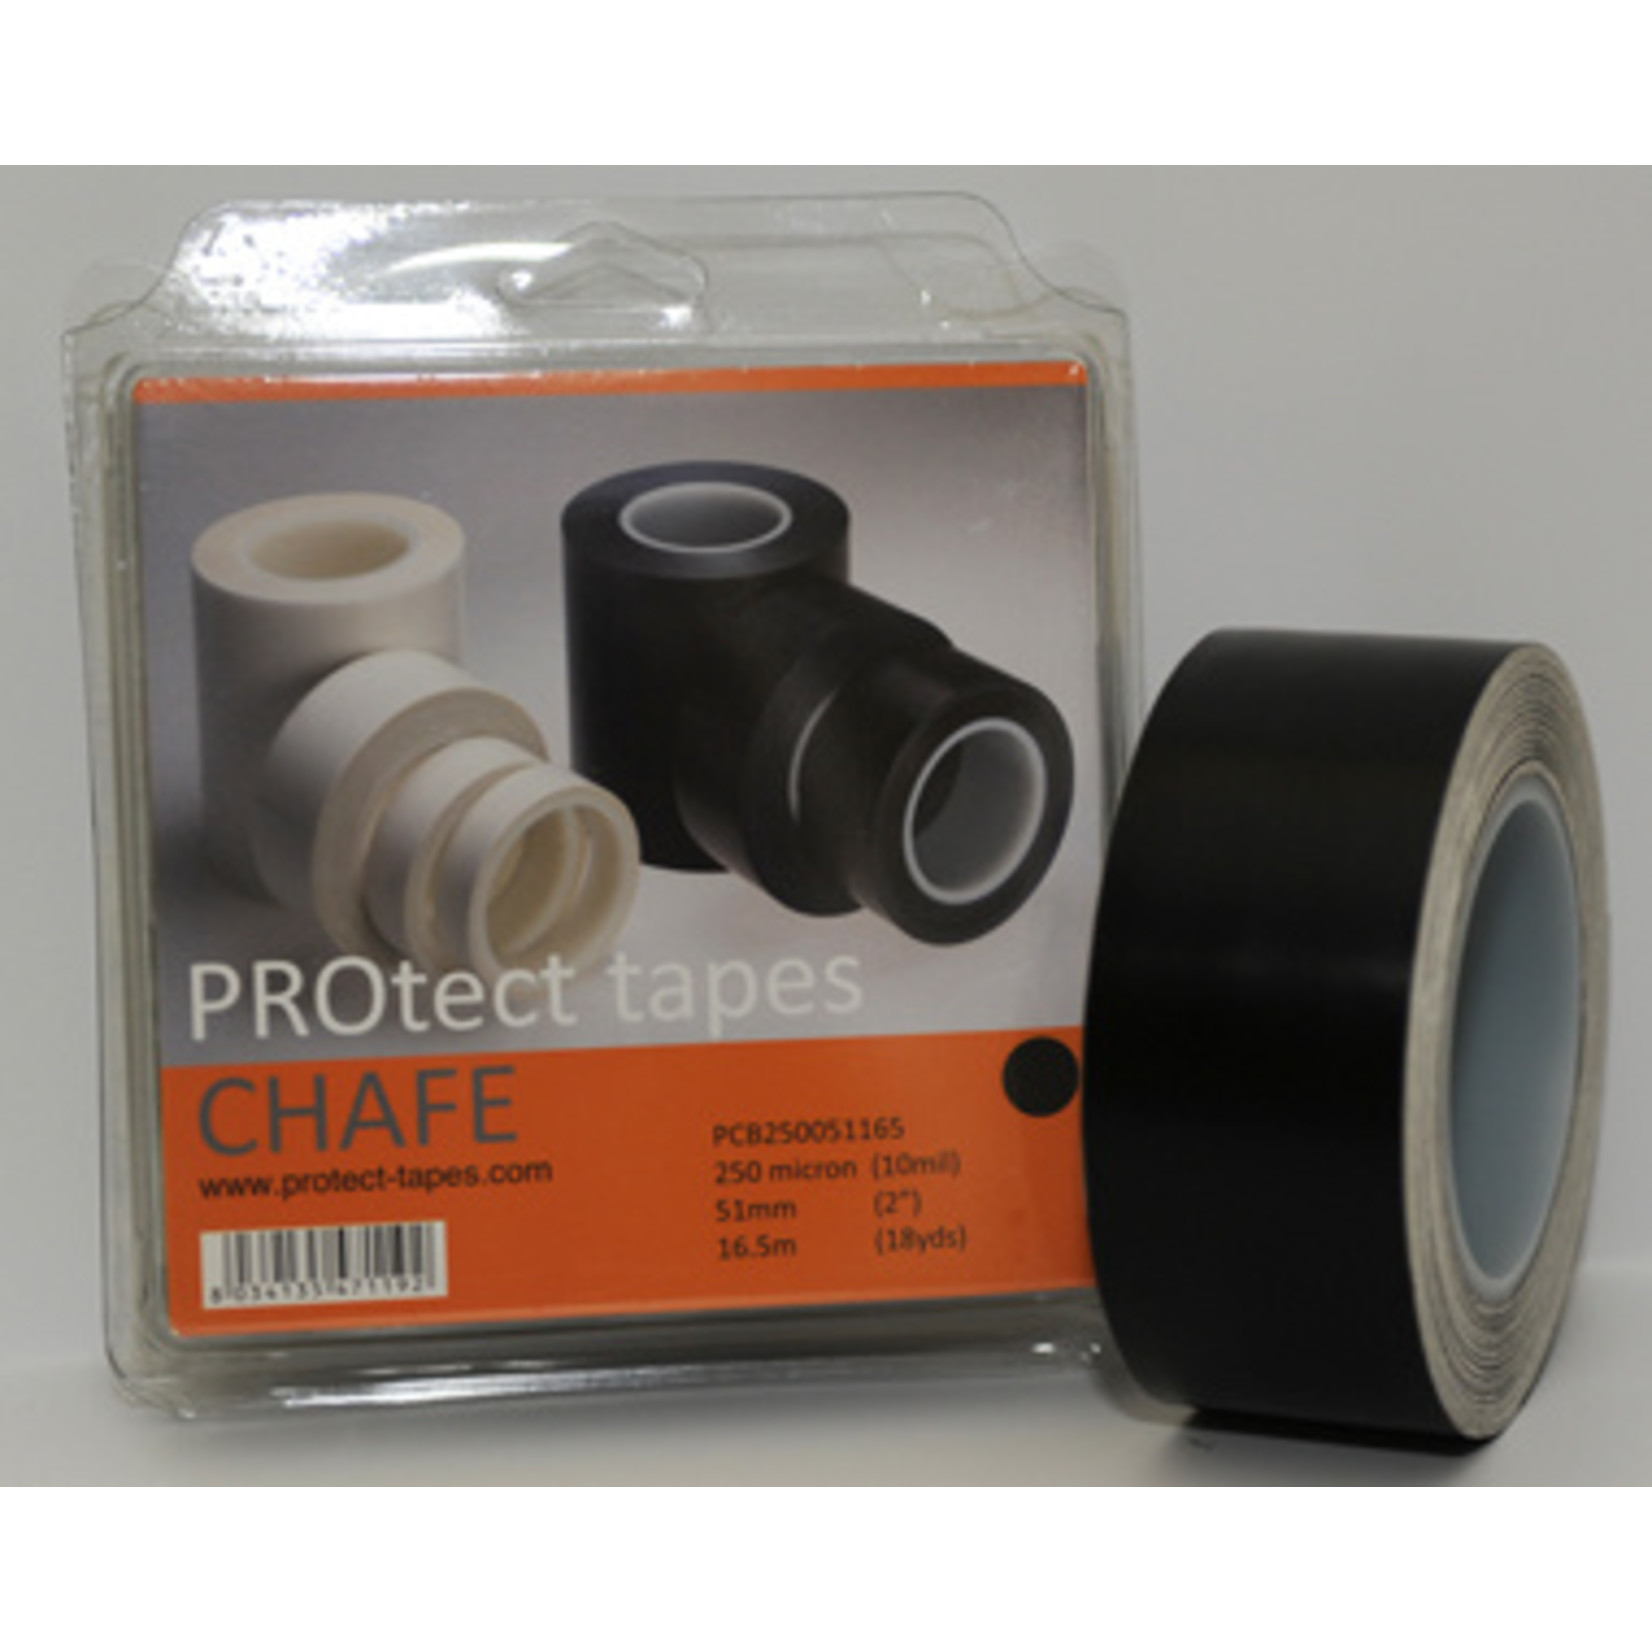 PROtect Tapes Chafe 250mic. black 51mm x 16.5m